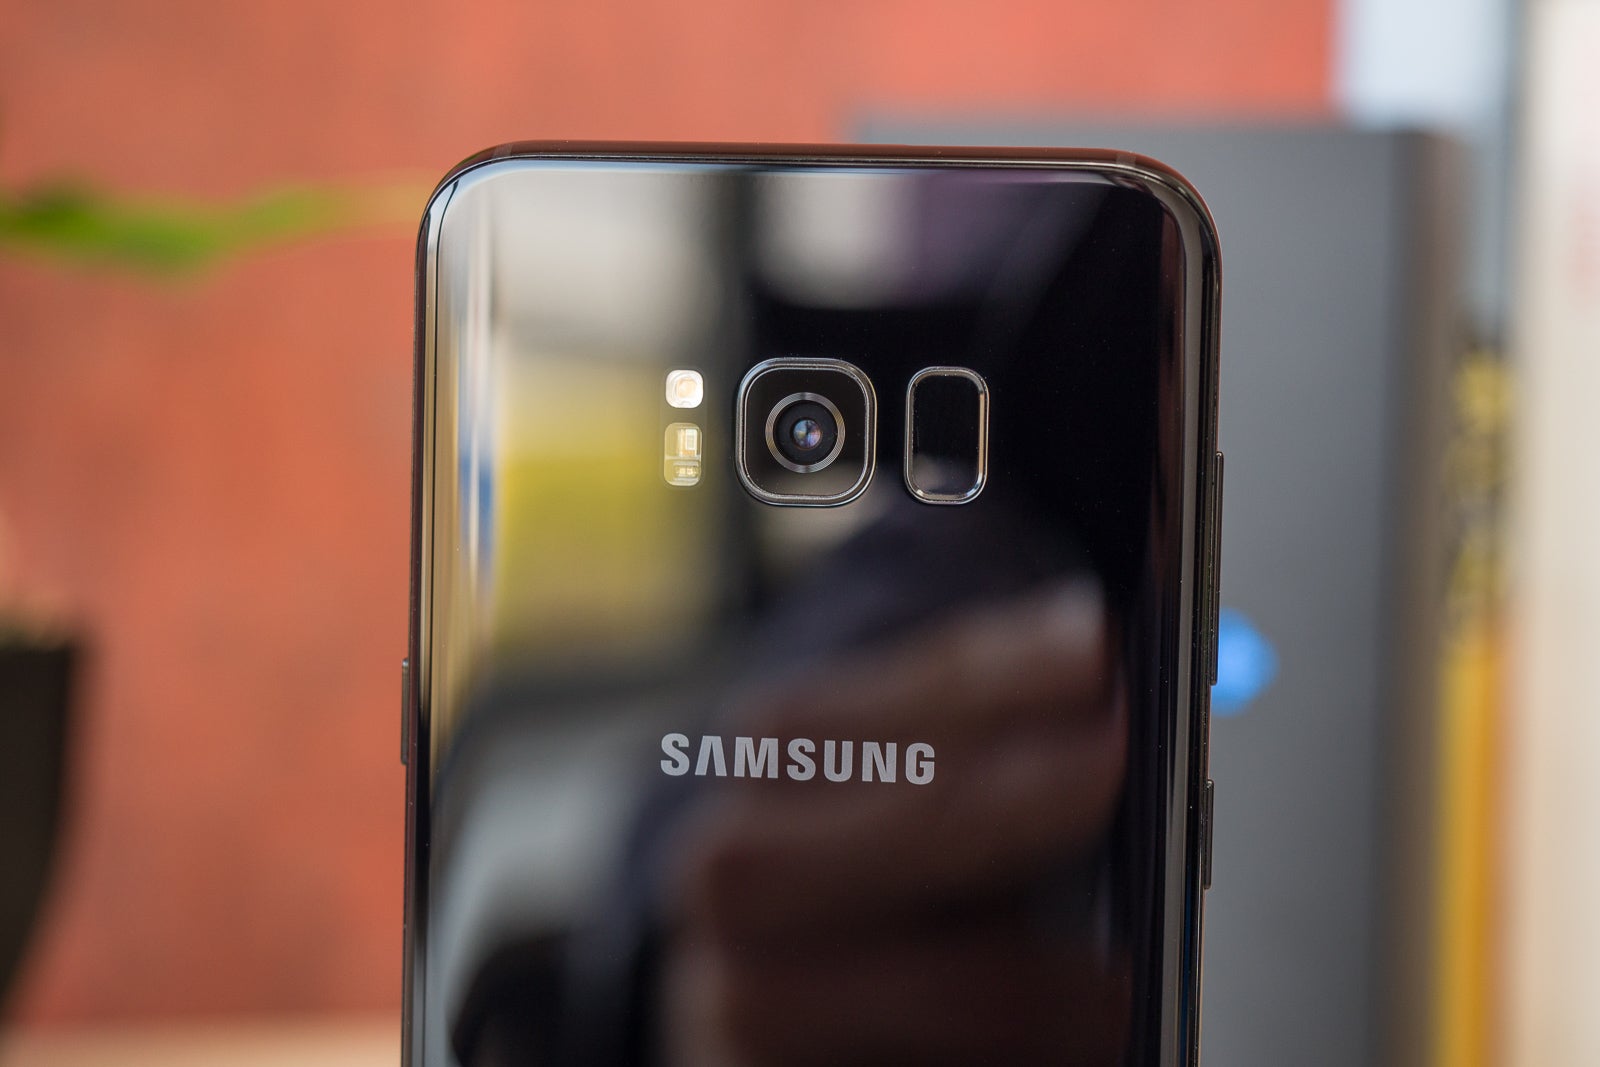 Samsung Galaxy S8 might get Note 8's Portrait Mode via a software update